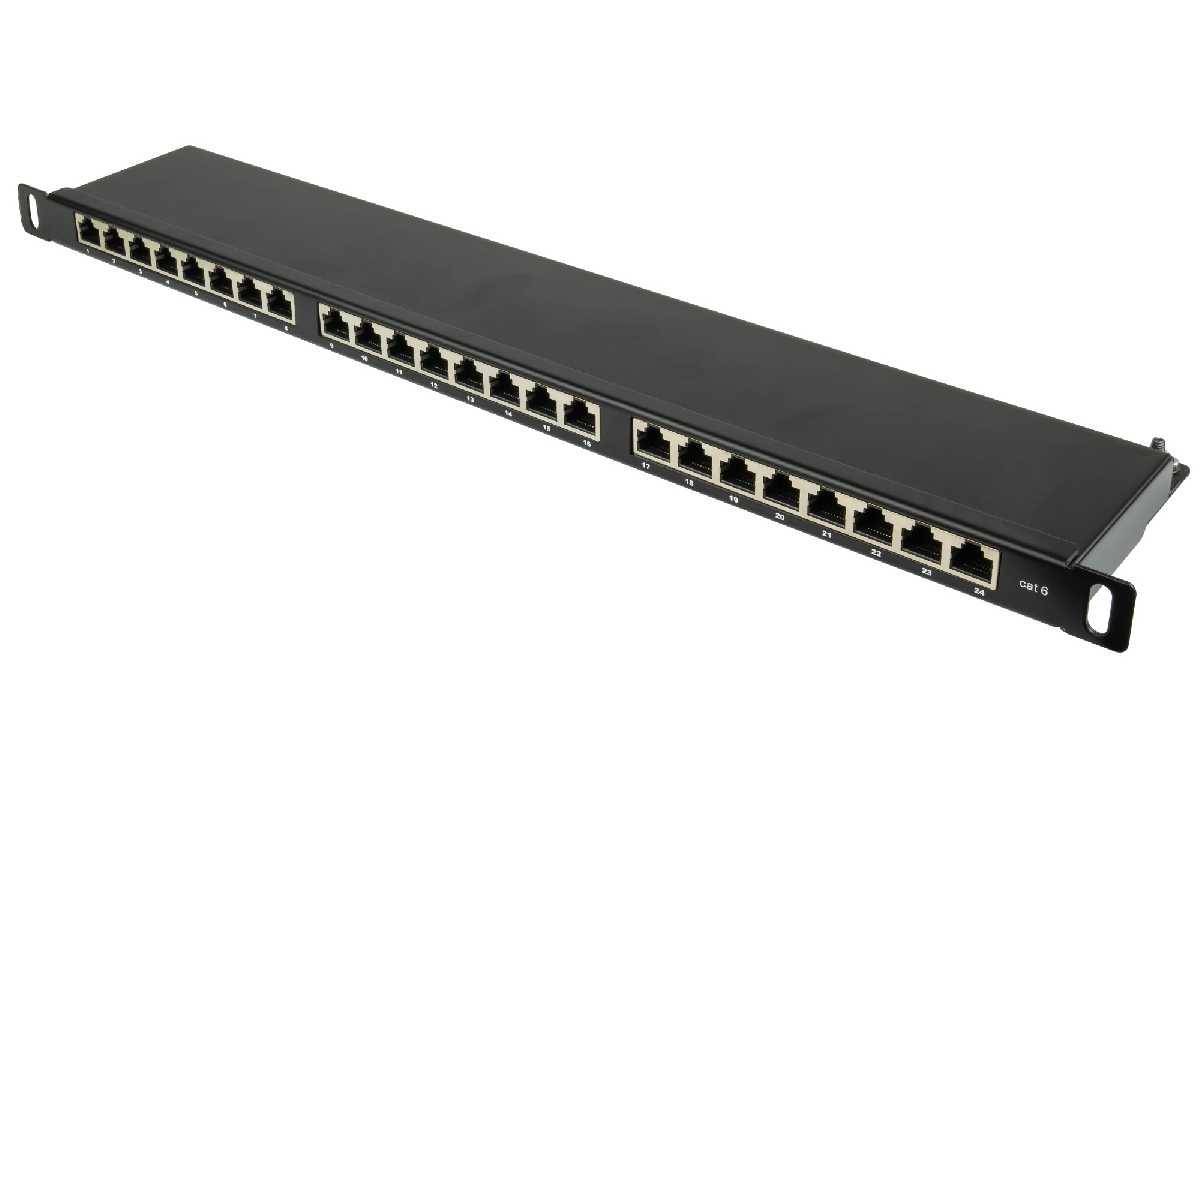 CAT6 Patchpanel 24-fach 19\" 0,5HE